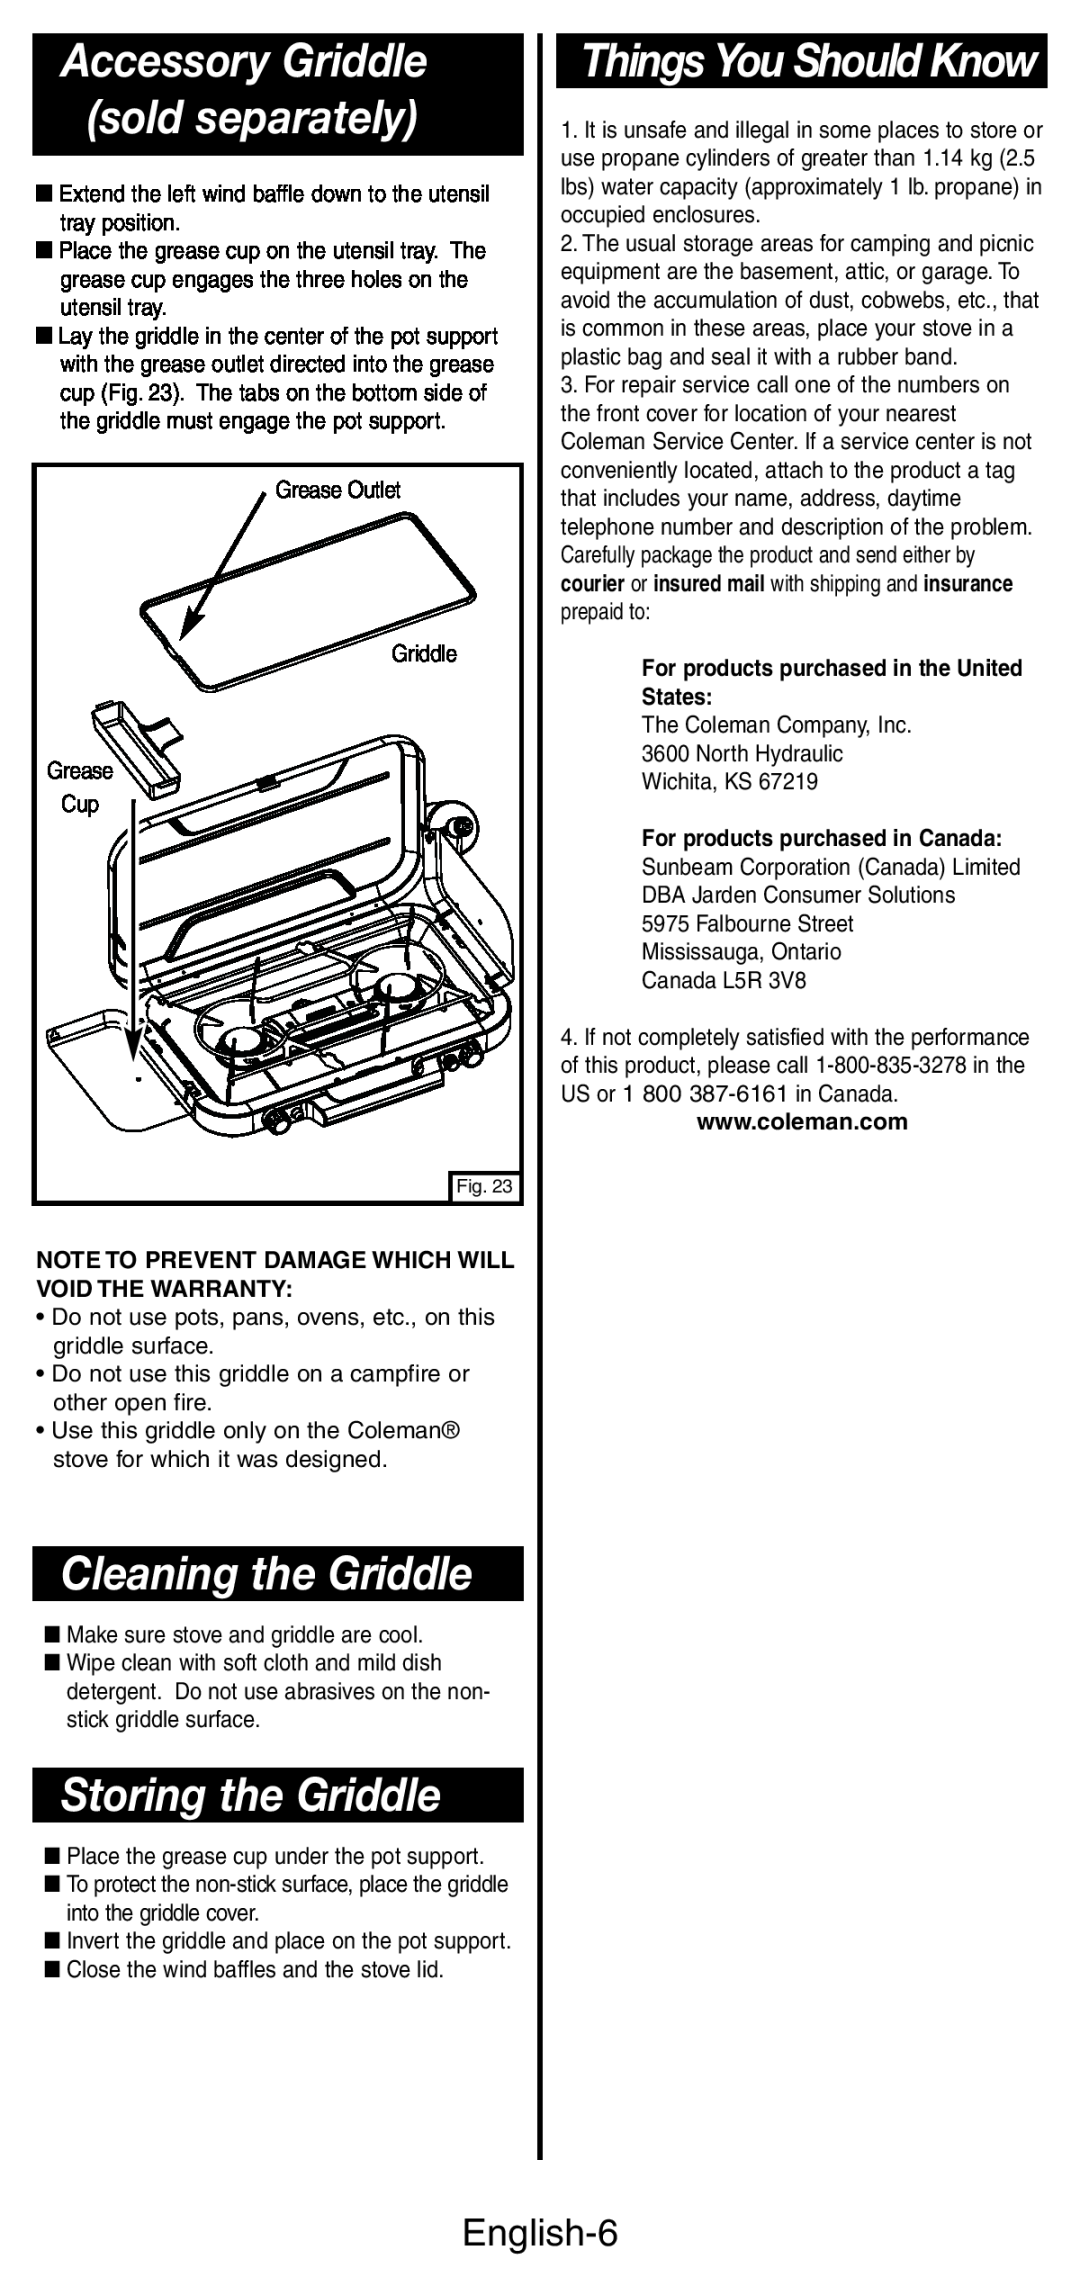 Coleman 5444 Series Cleaning the Griddle, Storing the Griddle, Accessory Griddle sold separately, Things You Should Know 